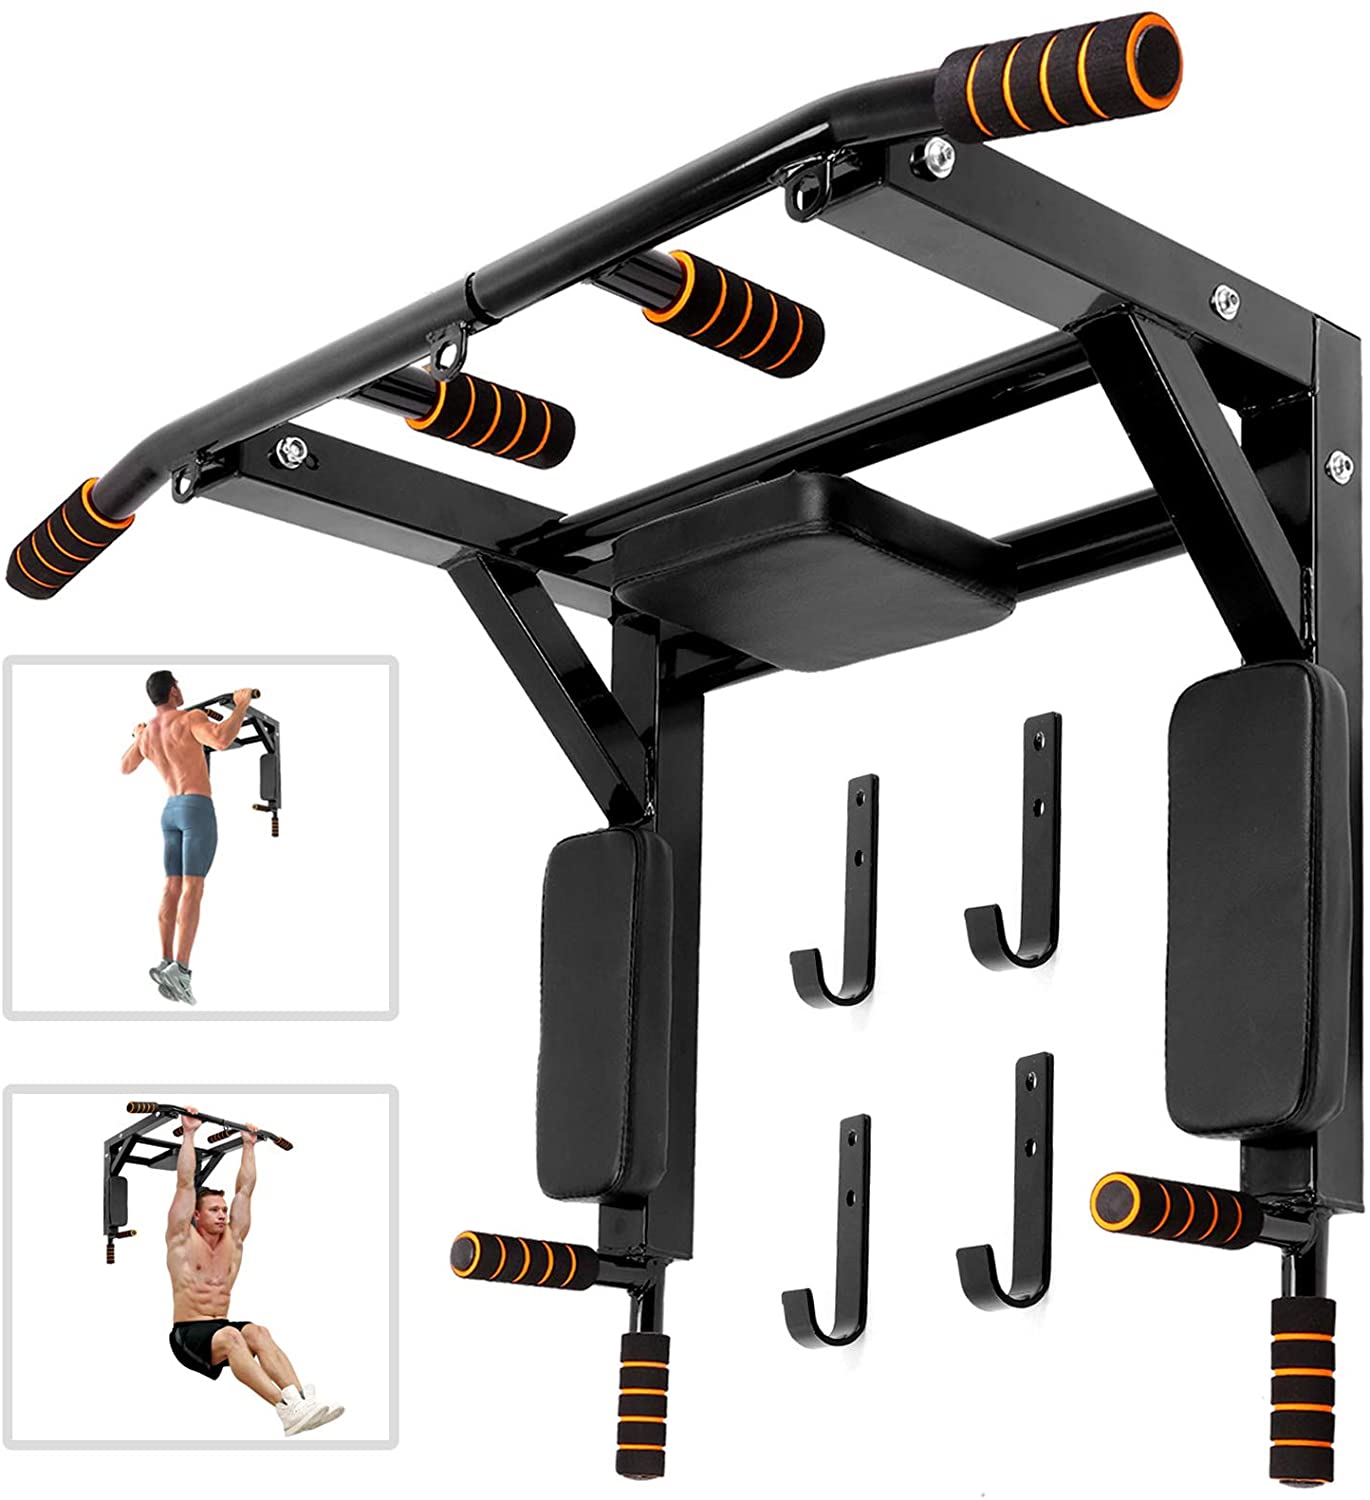 10 Best Wall Mounted Pull Up Bar And Dip Station Reviews